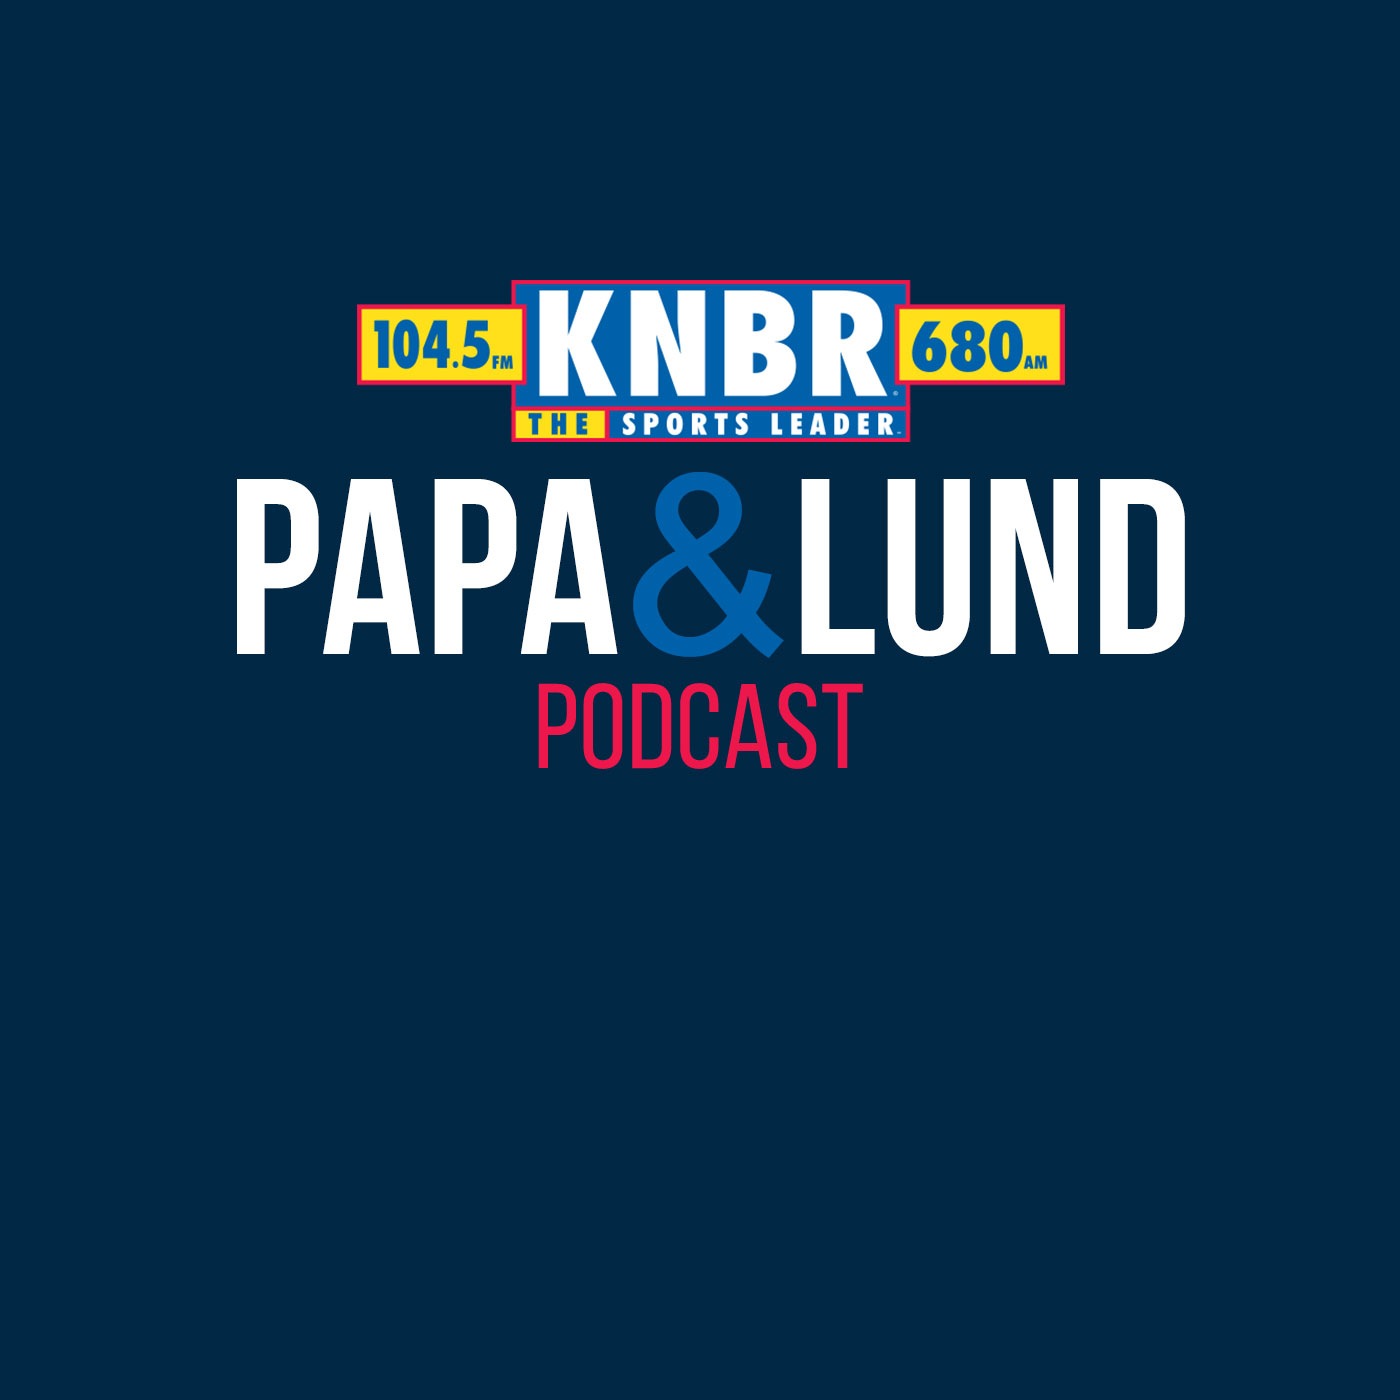 4-16 Logan Webb joins Papa & Lund to discuss how he is feeling for another high stakes game between the Warriors & Kings